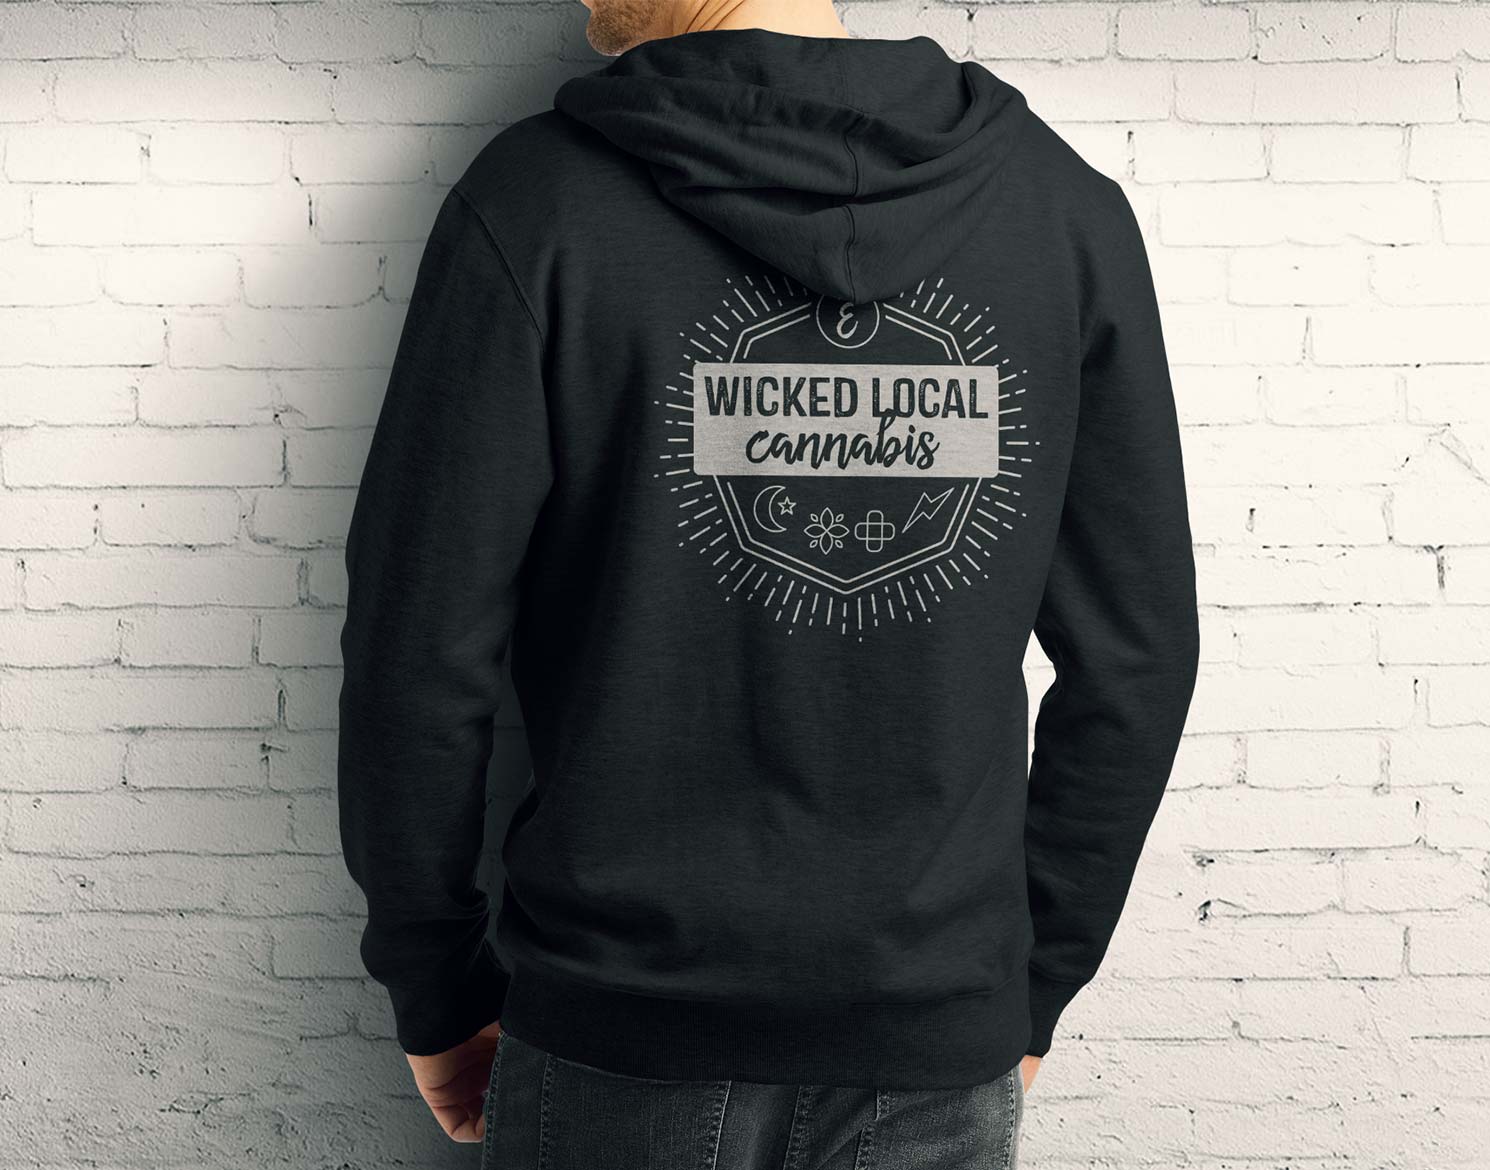 man wearing an Ermont sweatshirt with artwork on back that says "Wicked Local Cannabis"